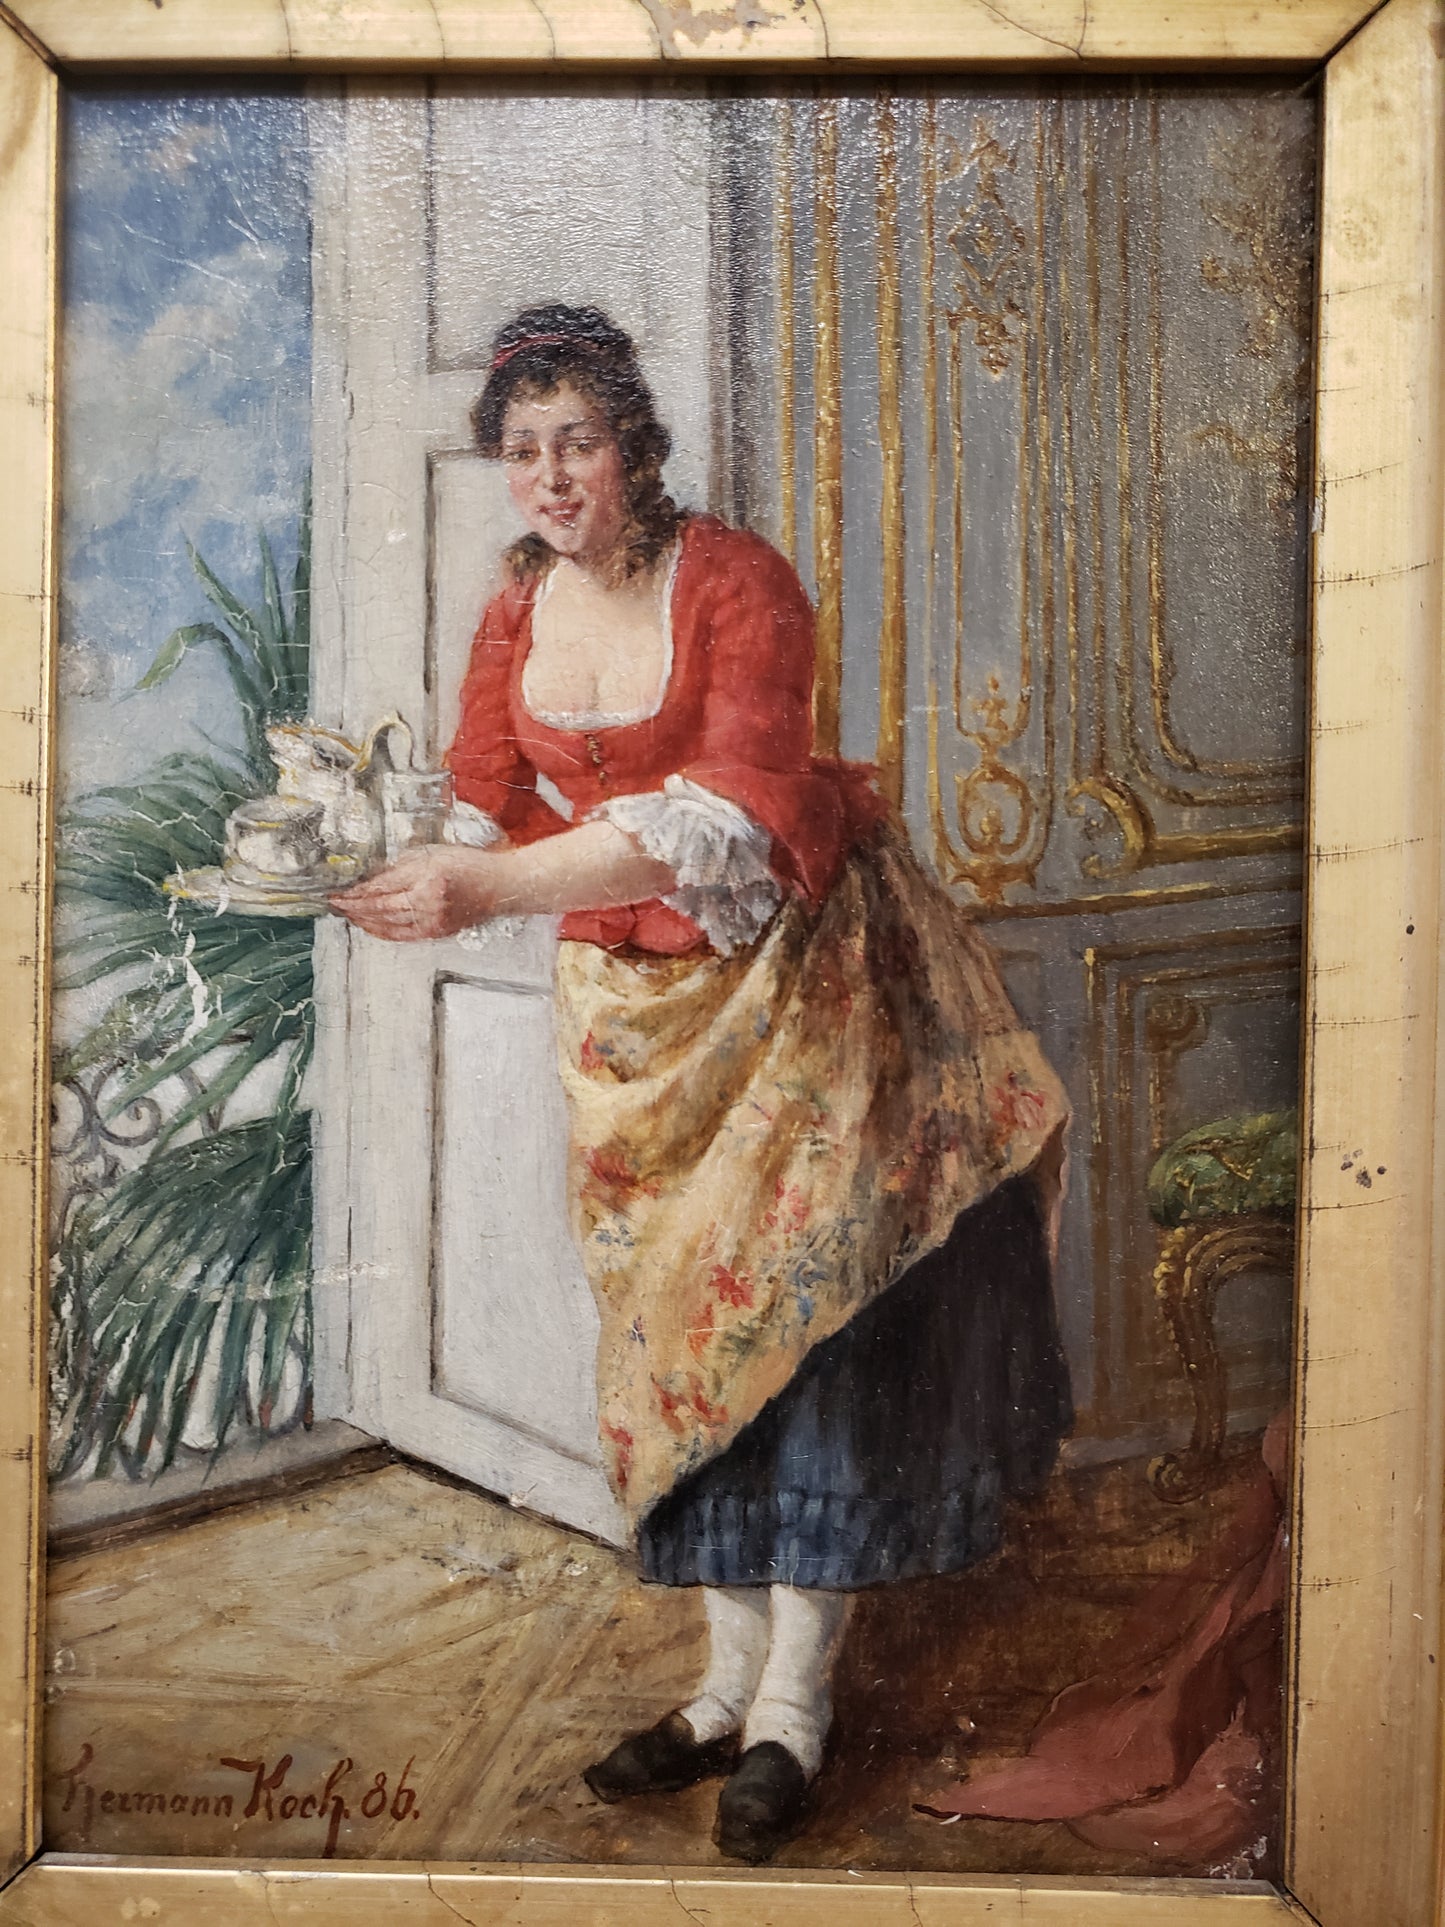 Late 19th Century Hermann Koch, "Woman With Tray" Figurative Oil Painting, Framed